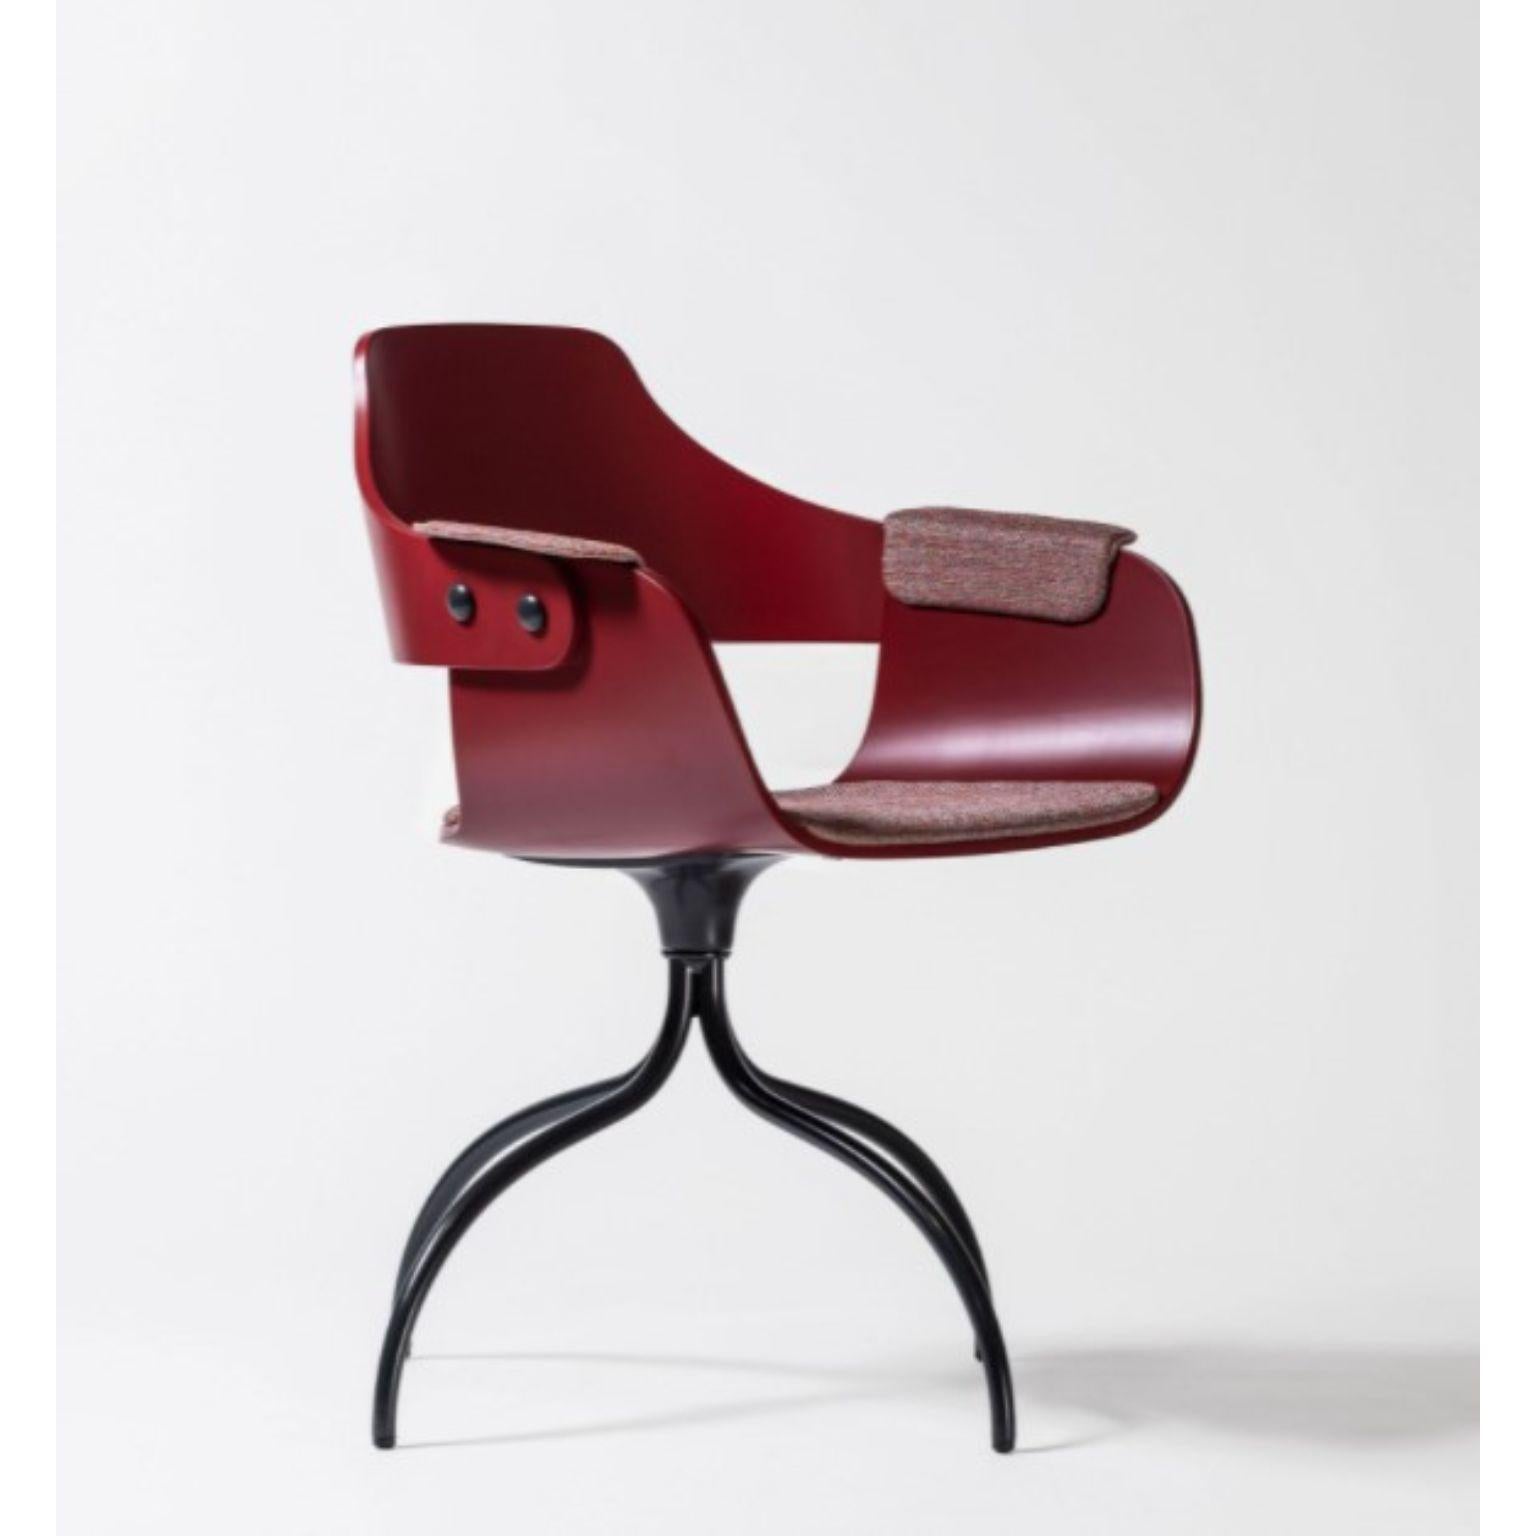 Swivel base showtime red ash chair by Jaime Hayon 
Dimensions: D 55 x W 55 x H 79 cm 
Materials: Powder-coated steel or aluminum structure. Legs, seat, and backrest in plywood with exteriors in natural ash, walnut, or ash stained black. Metallic